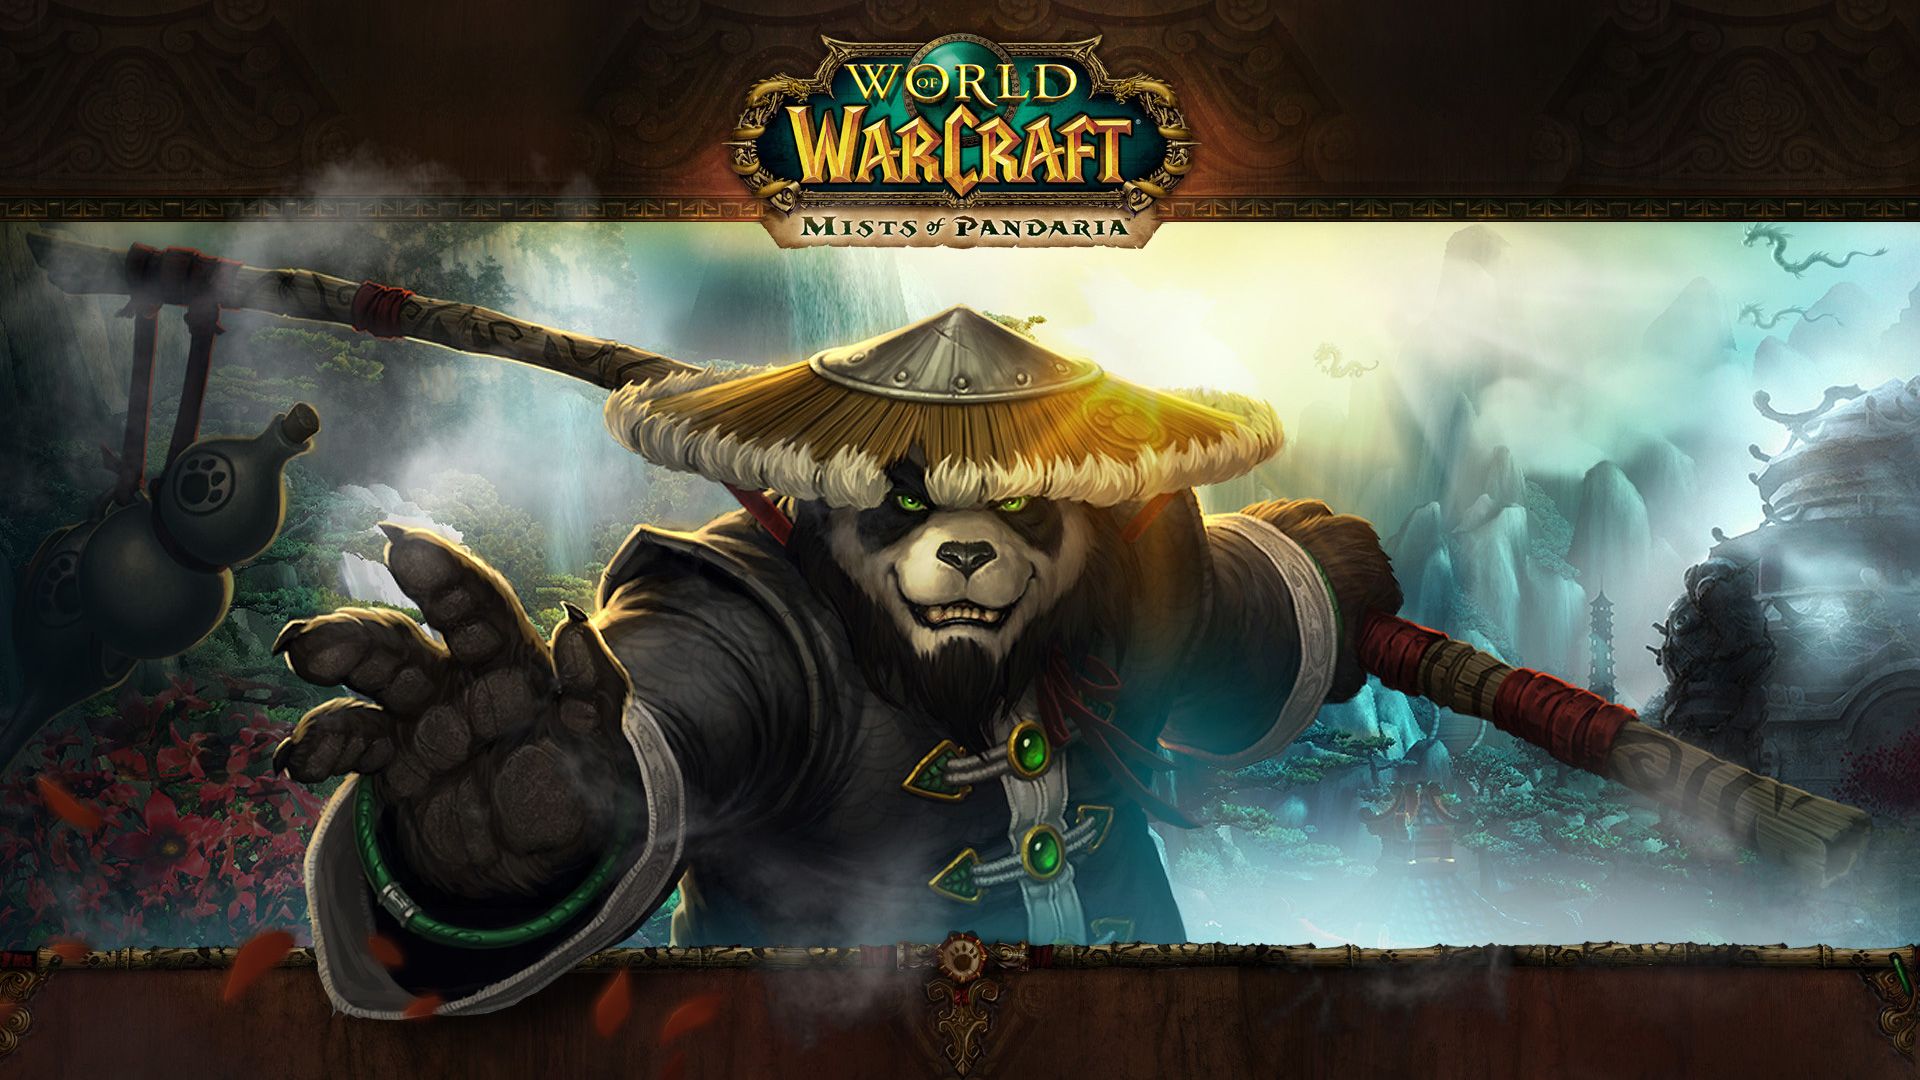 world of warcraft lost 1 3 million subscribers in three months image 1